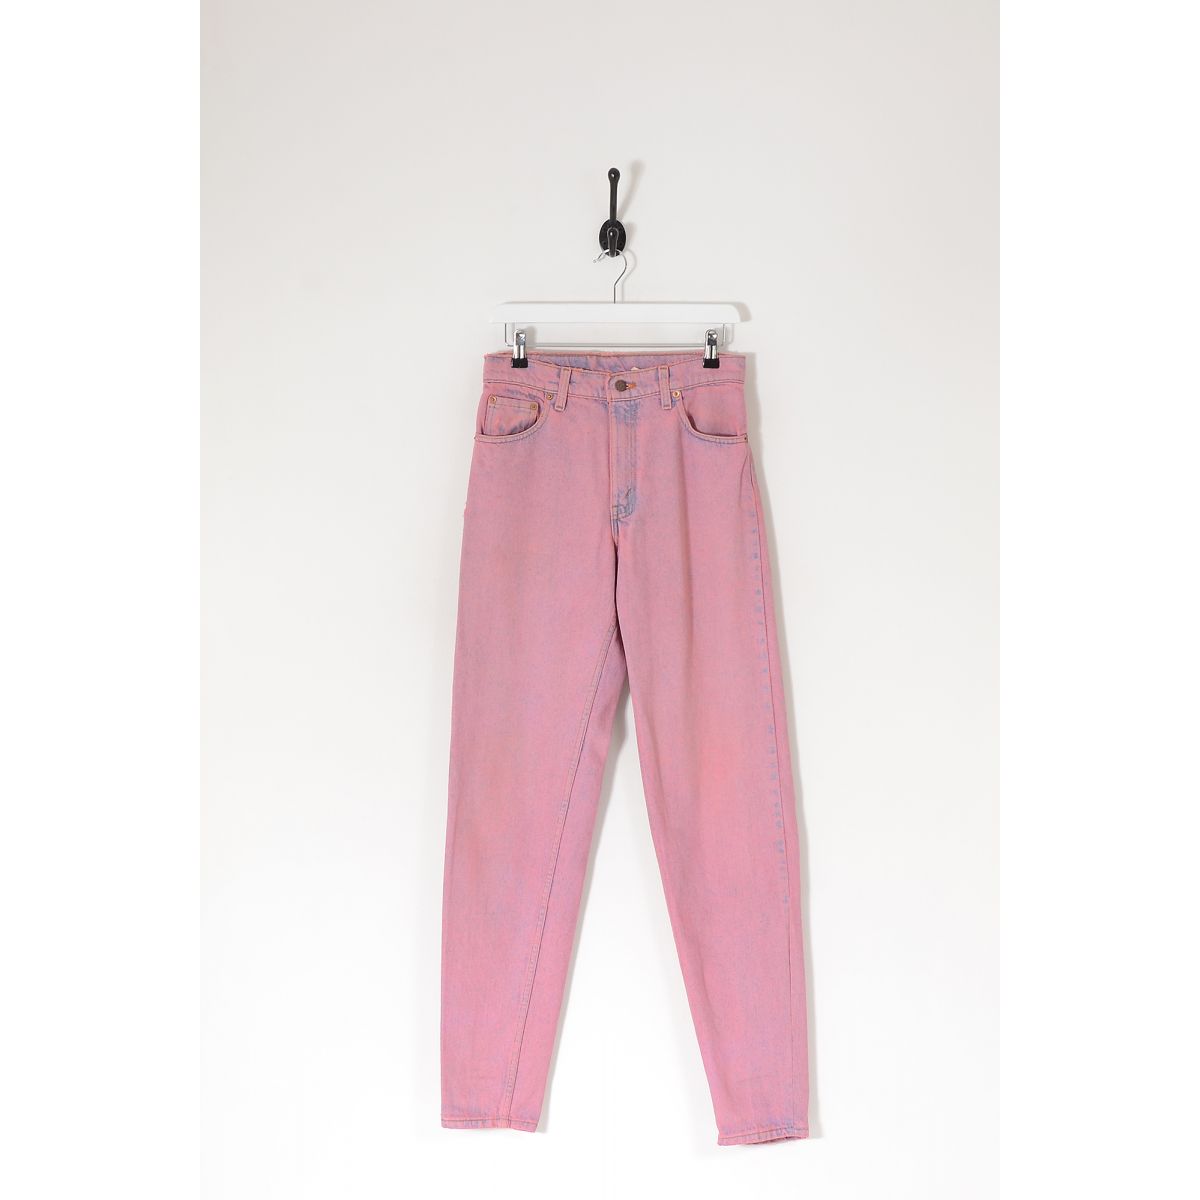 Vintage LEVI'S 550 Relaxed Tapered Fit Mom Jeans Pink W30 L34